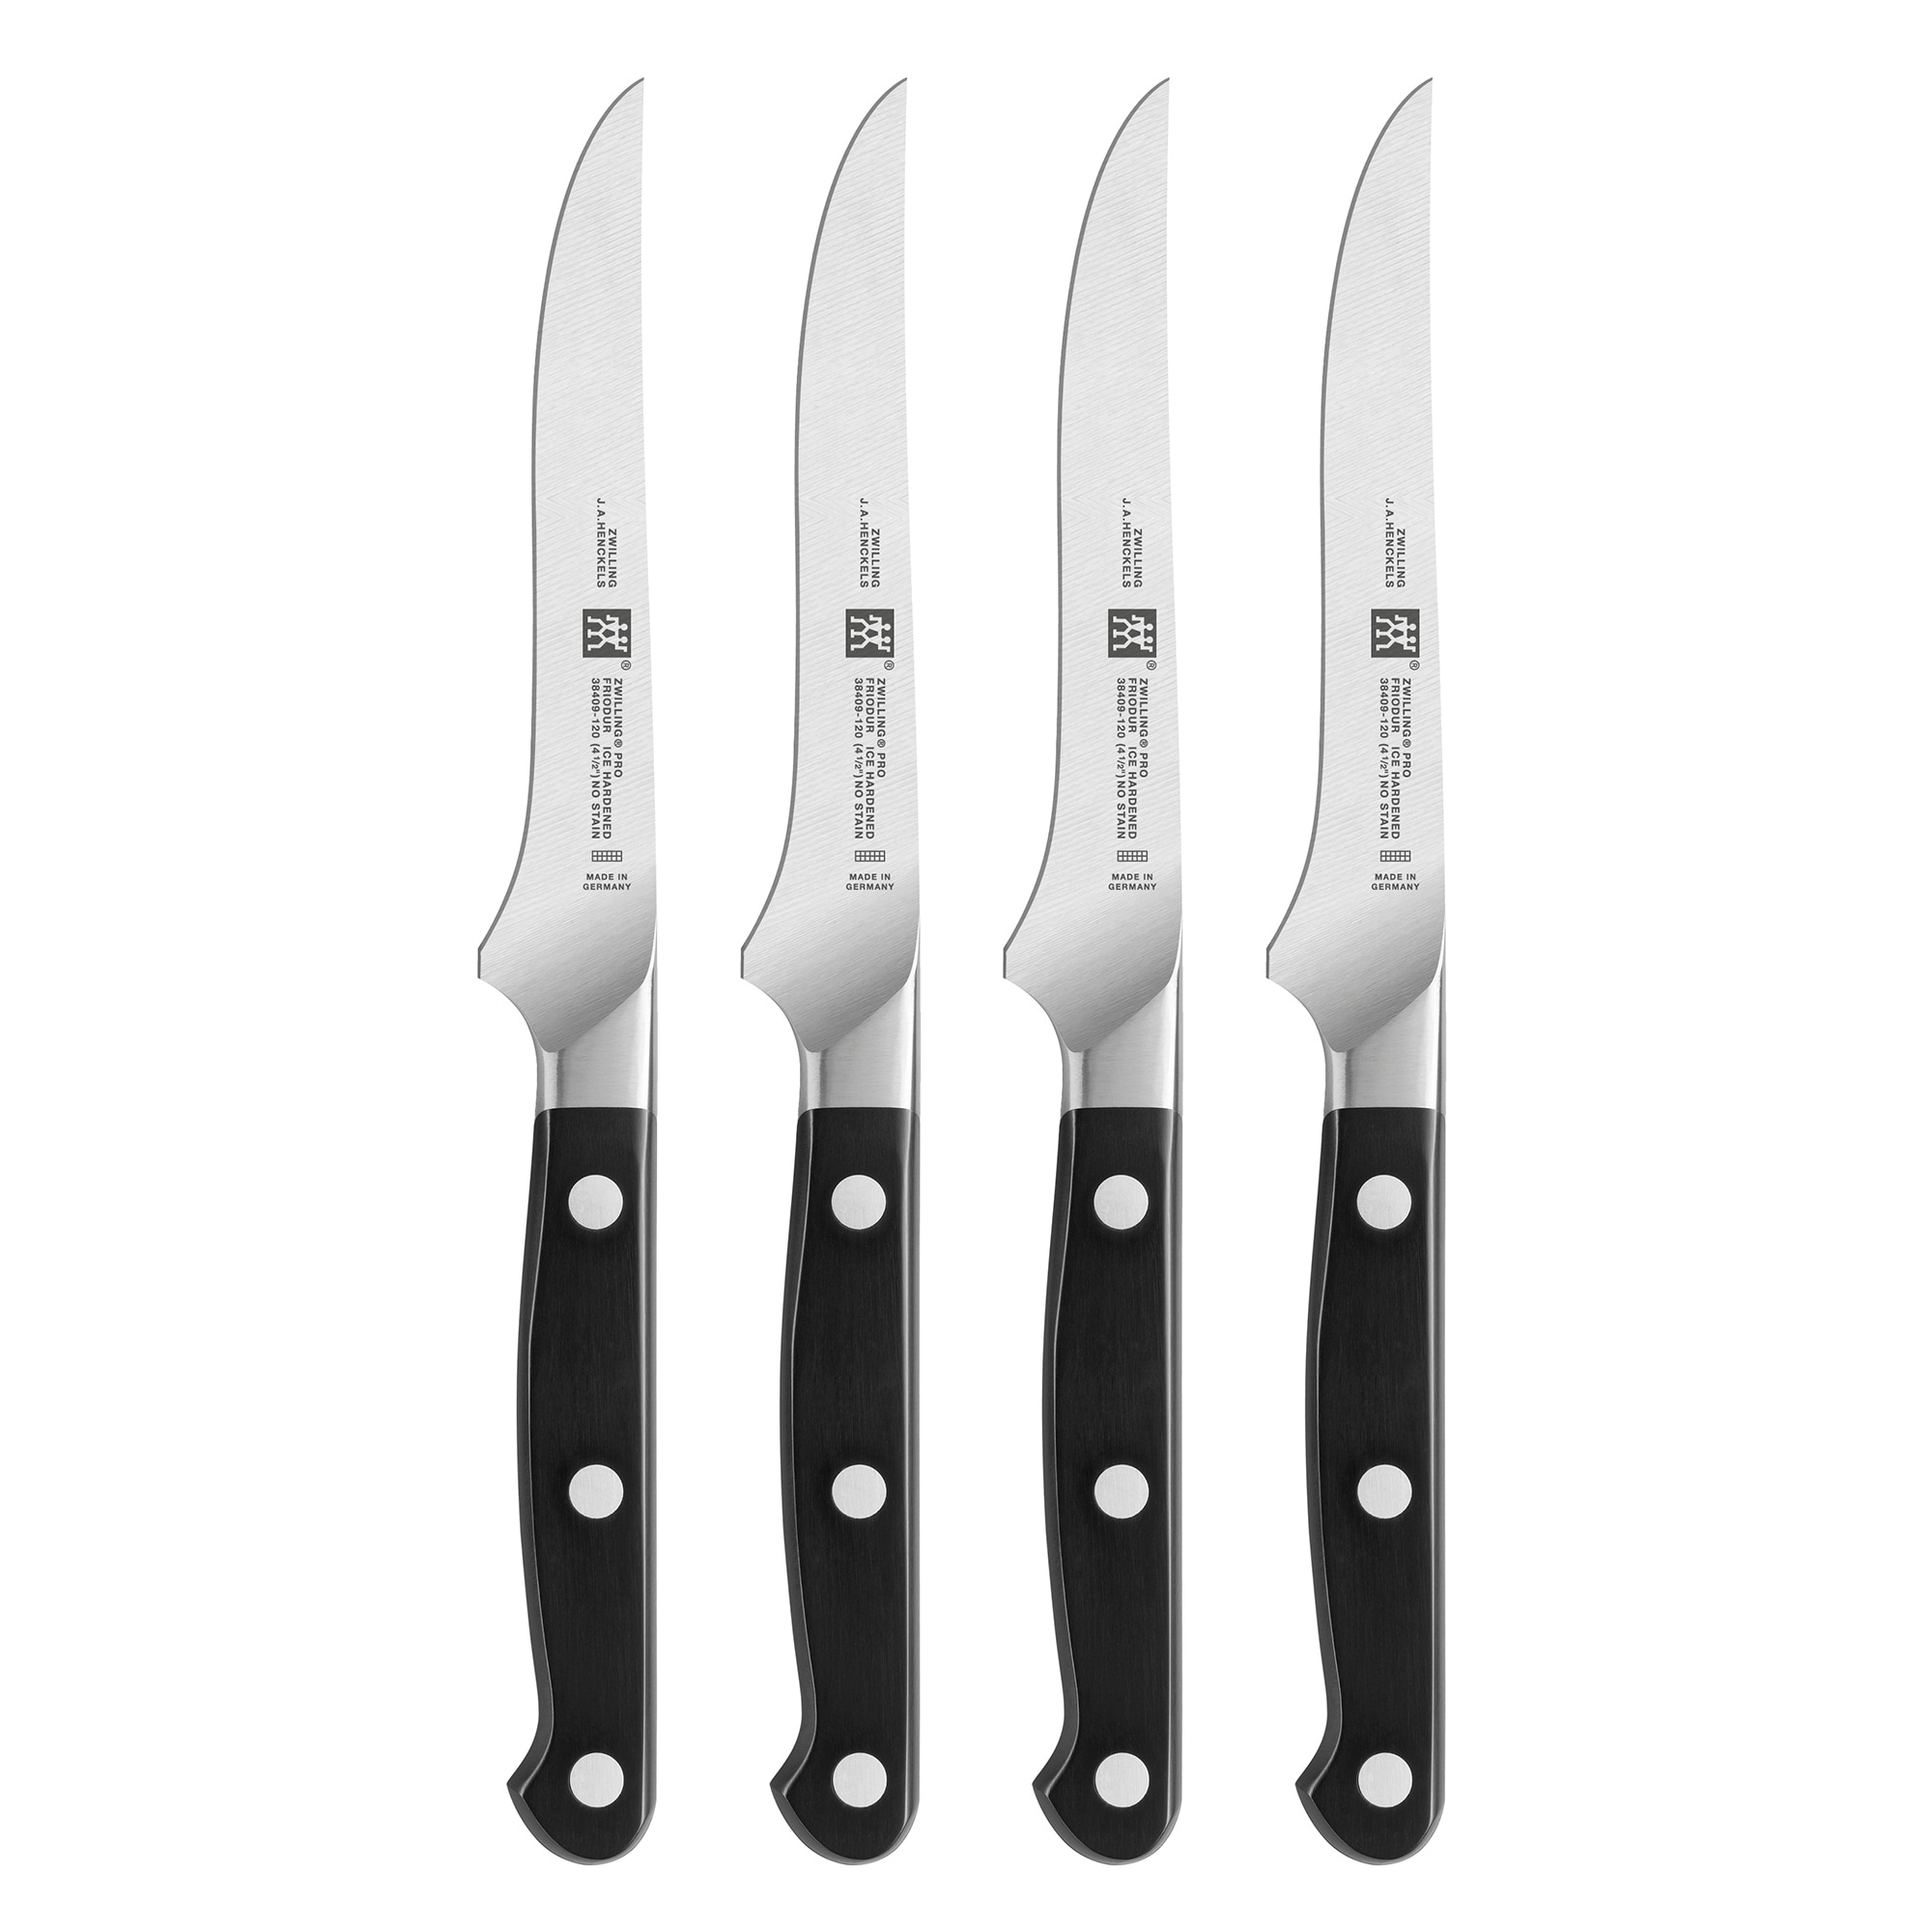 Zwilling J.A. Henckels Pro Le Blanc 2-Piece Exclusive Knife Set, White